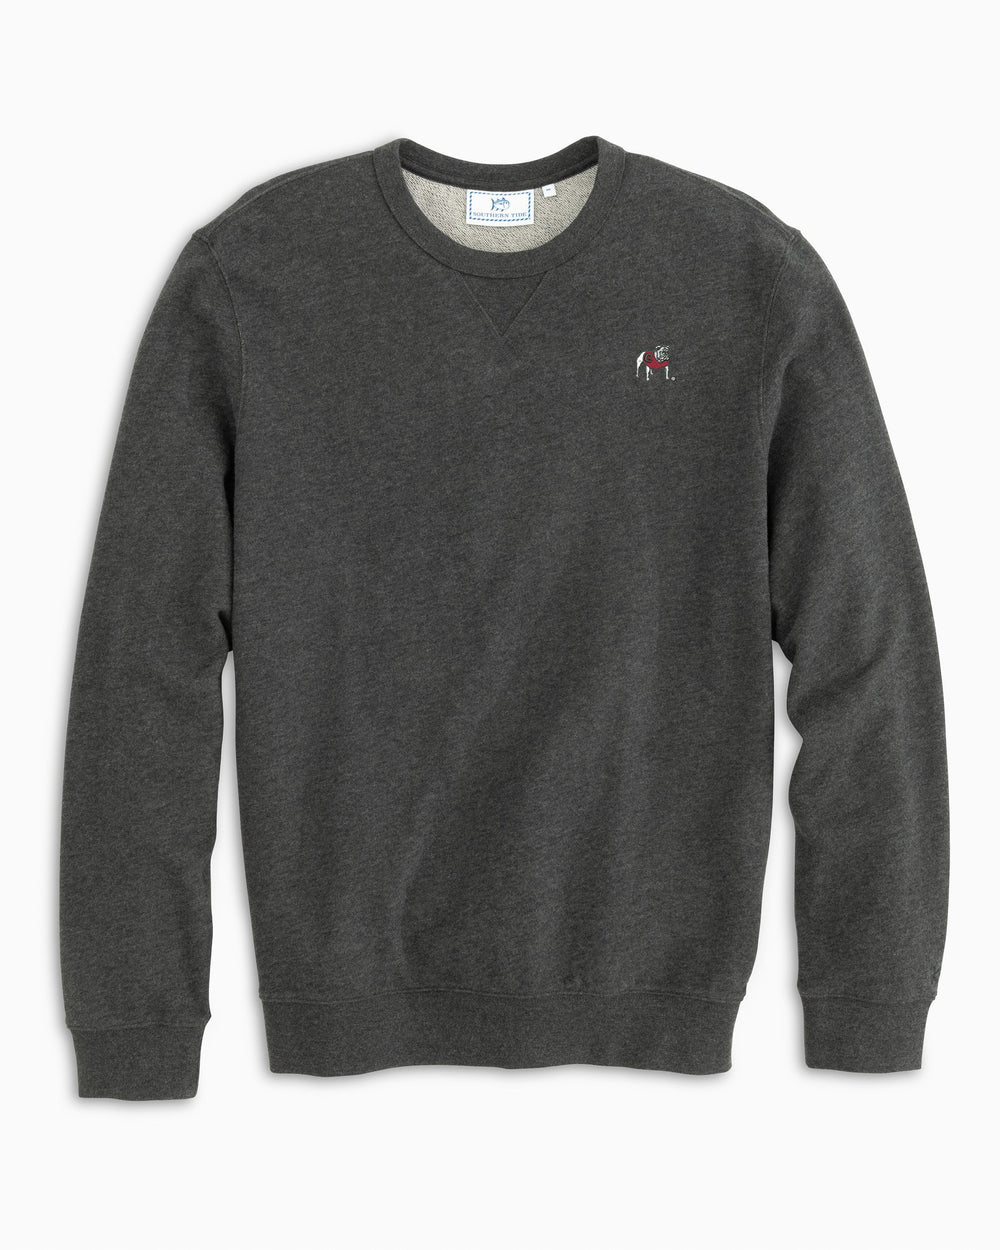 The front view of the Men's Grey Georgia Upper Deck Pullover Sweatshirt by Southern Tide - Heather Black